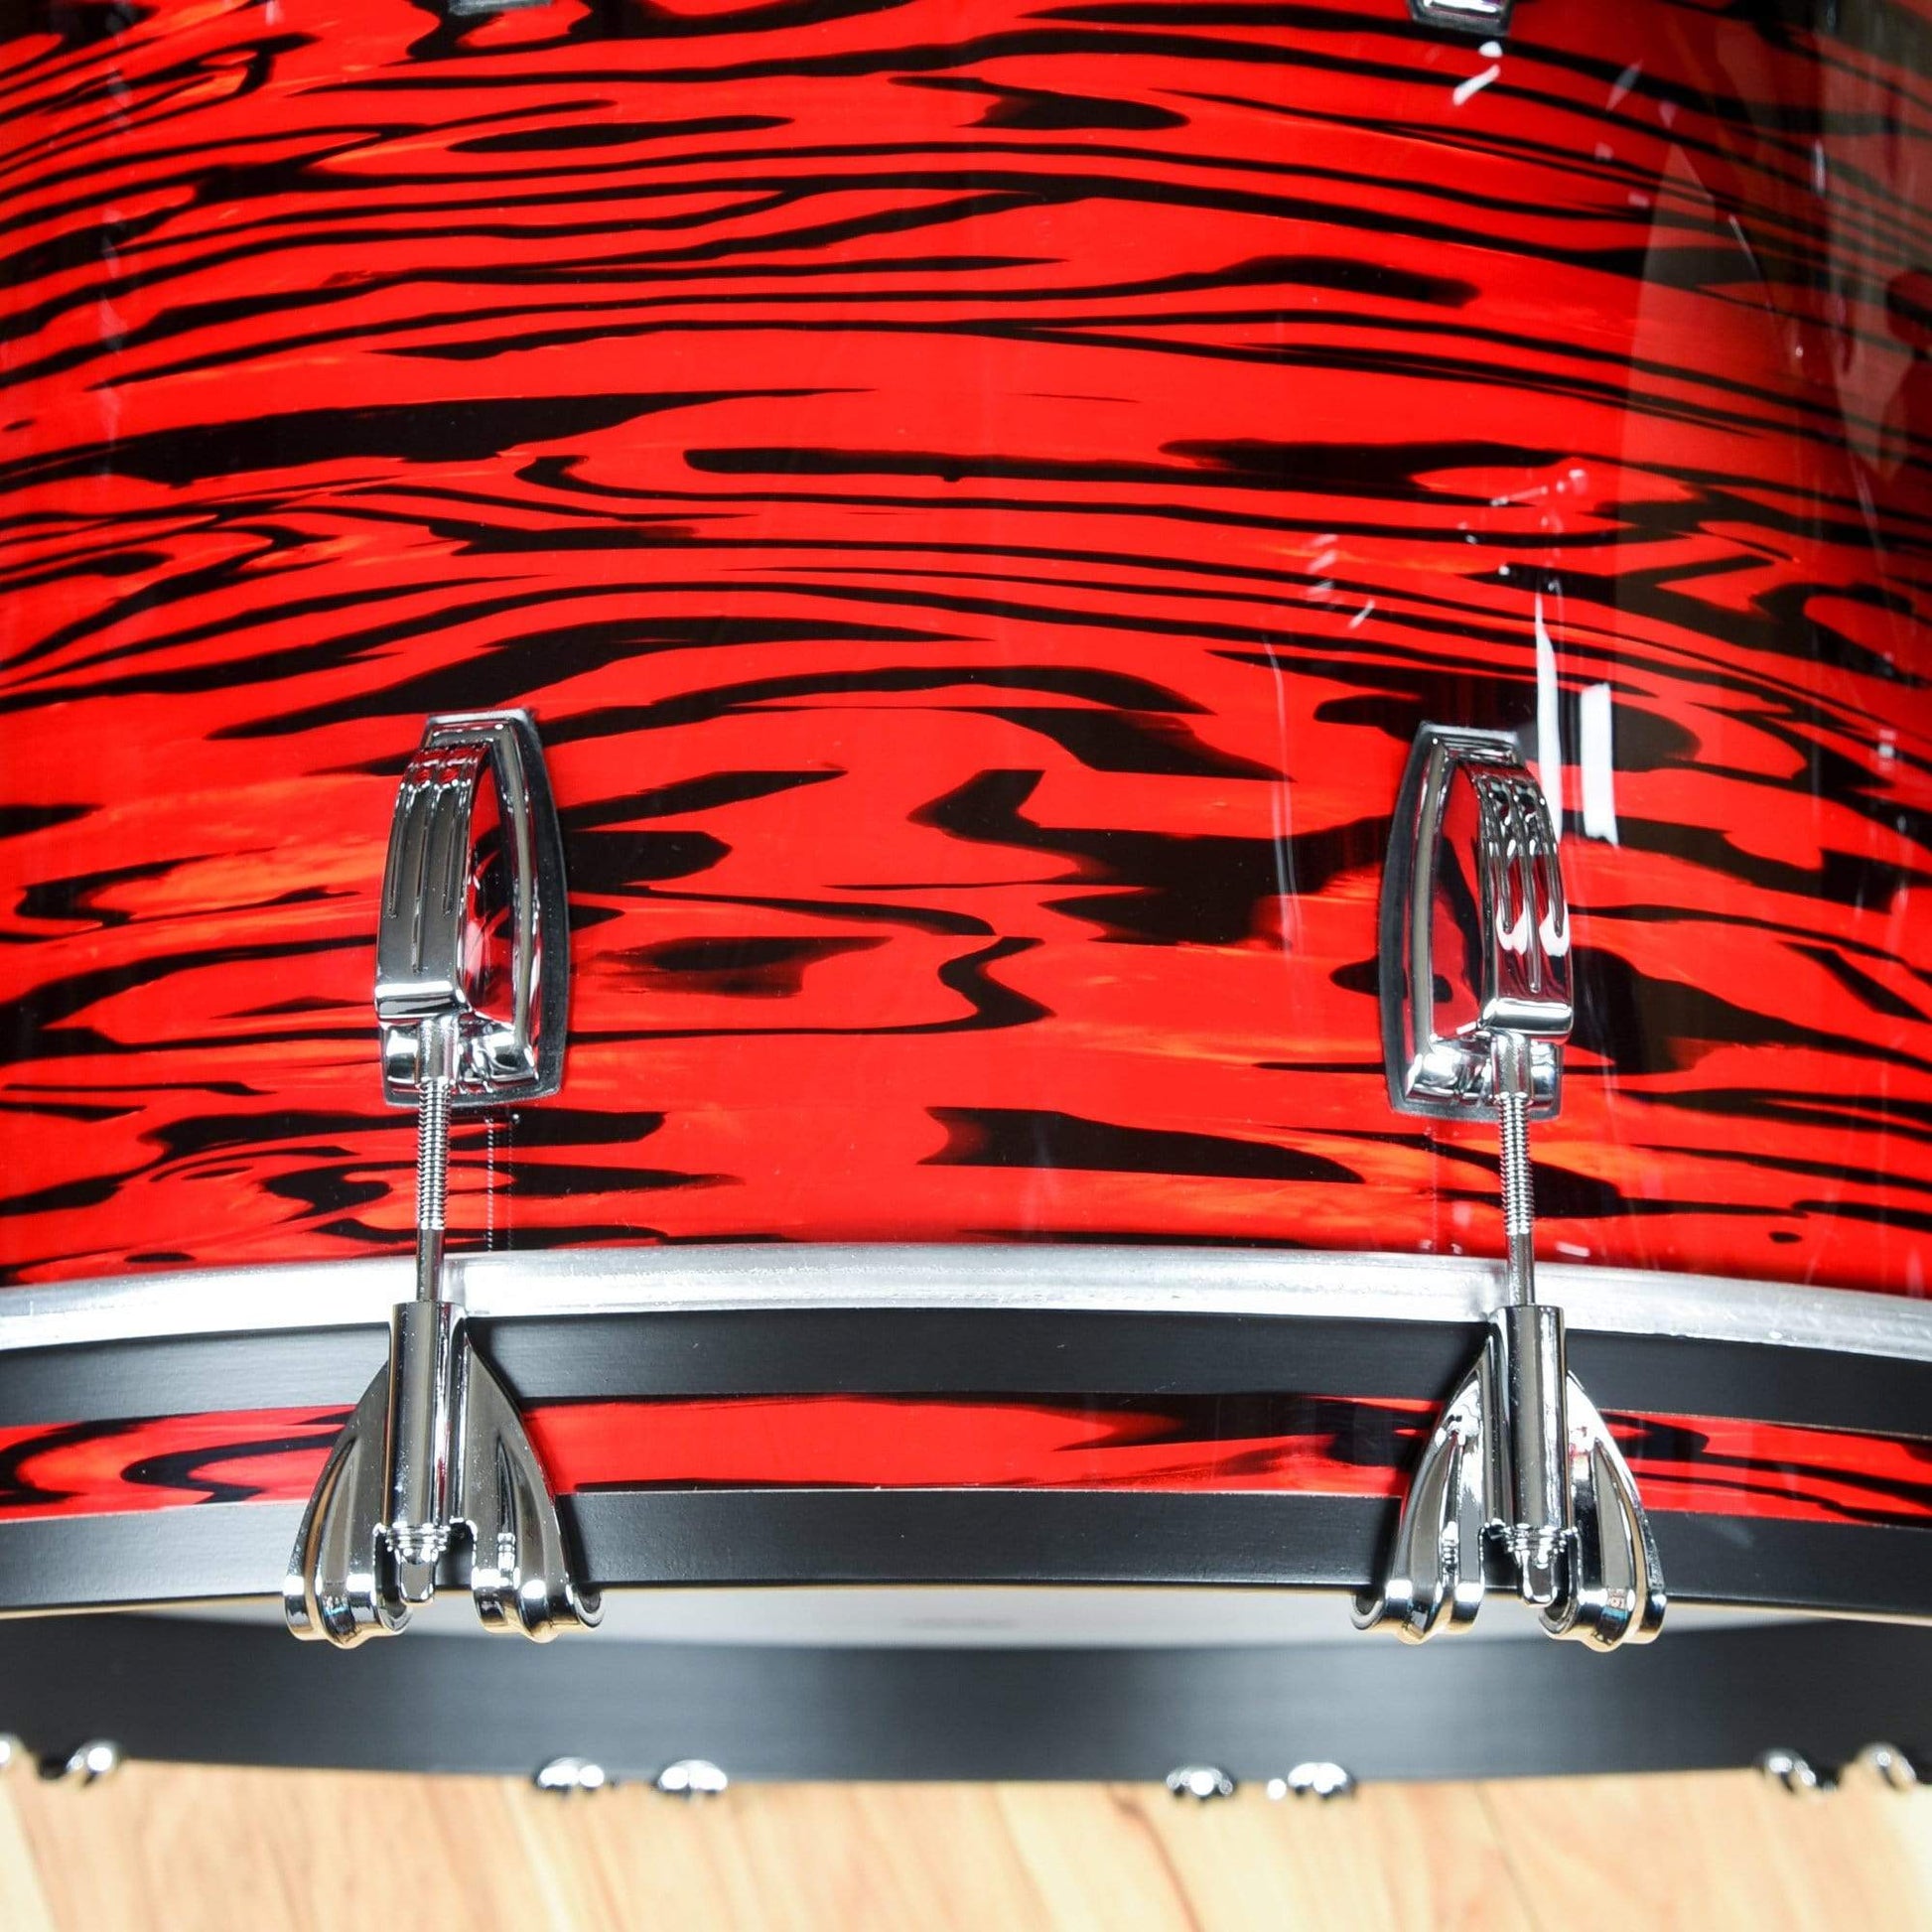 Ludwig Classic Maple 13/16/22 3pc. Drum Kit Red Swirl Drums and Percussion / Acoustic Drums / Full Acoustic Kits